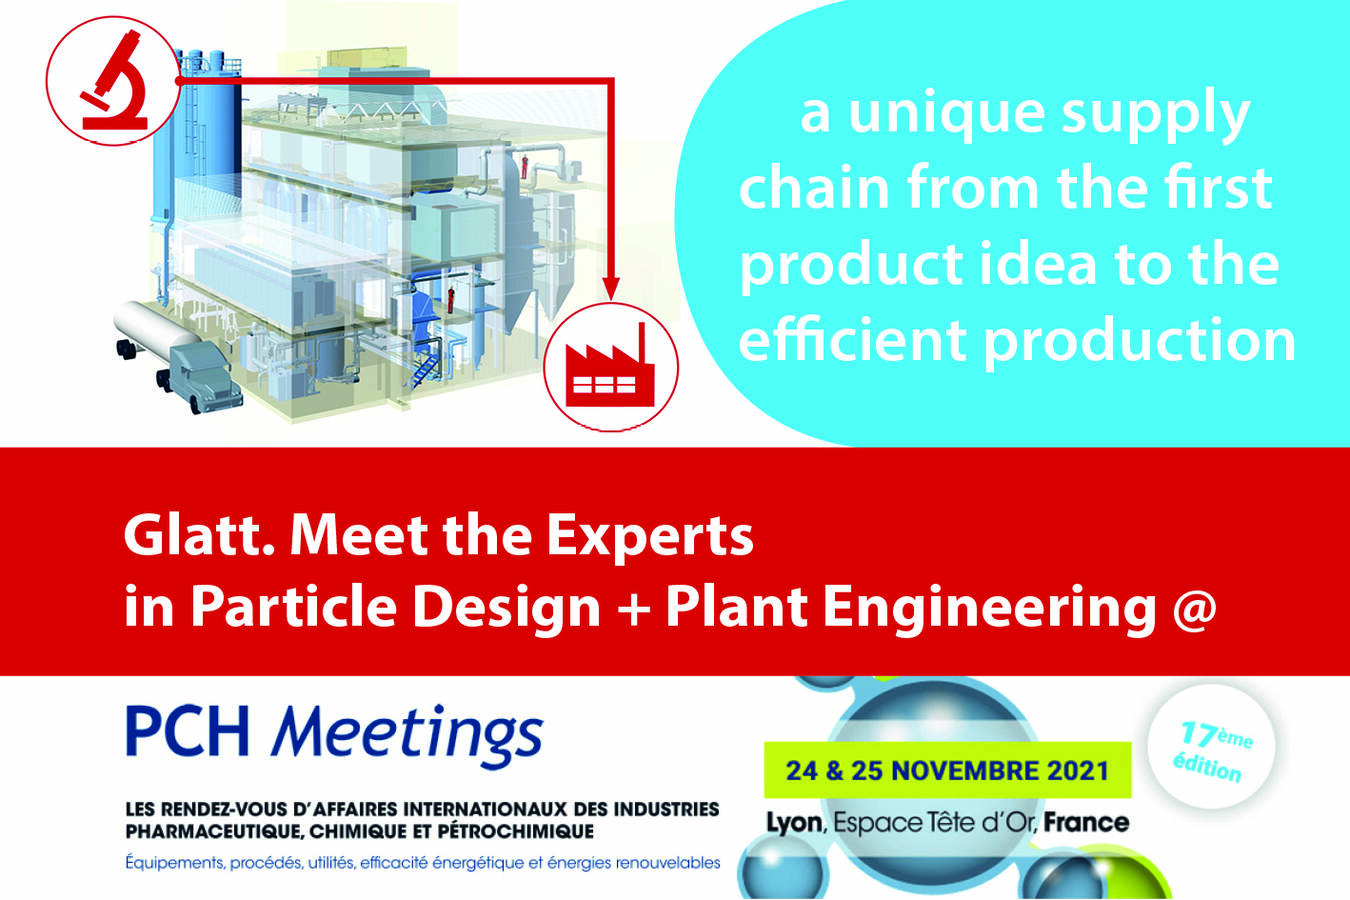 Glatt Particle Design + Plant Engineering at the PCH Meetings 2021 Meet the Glatt Experts Learn more about enhancing the functions of food, feed, chemical, and fine chemical ingredients.